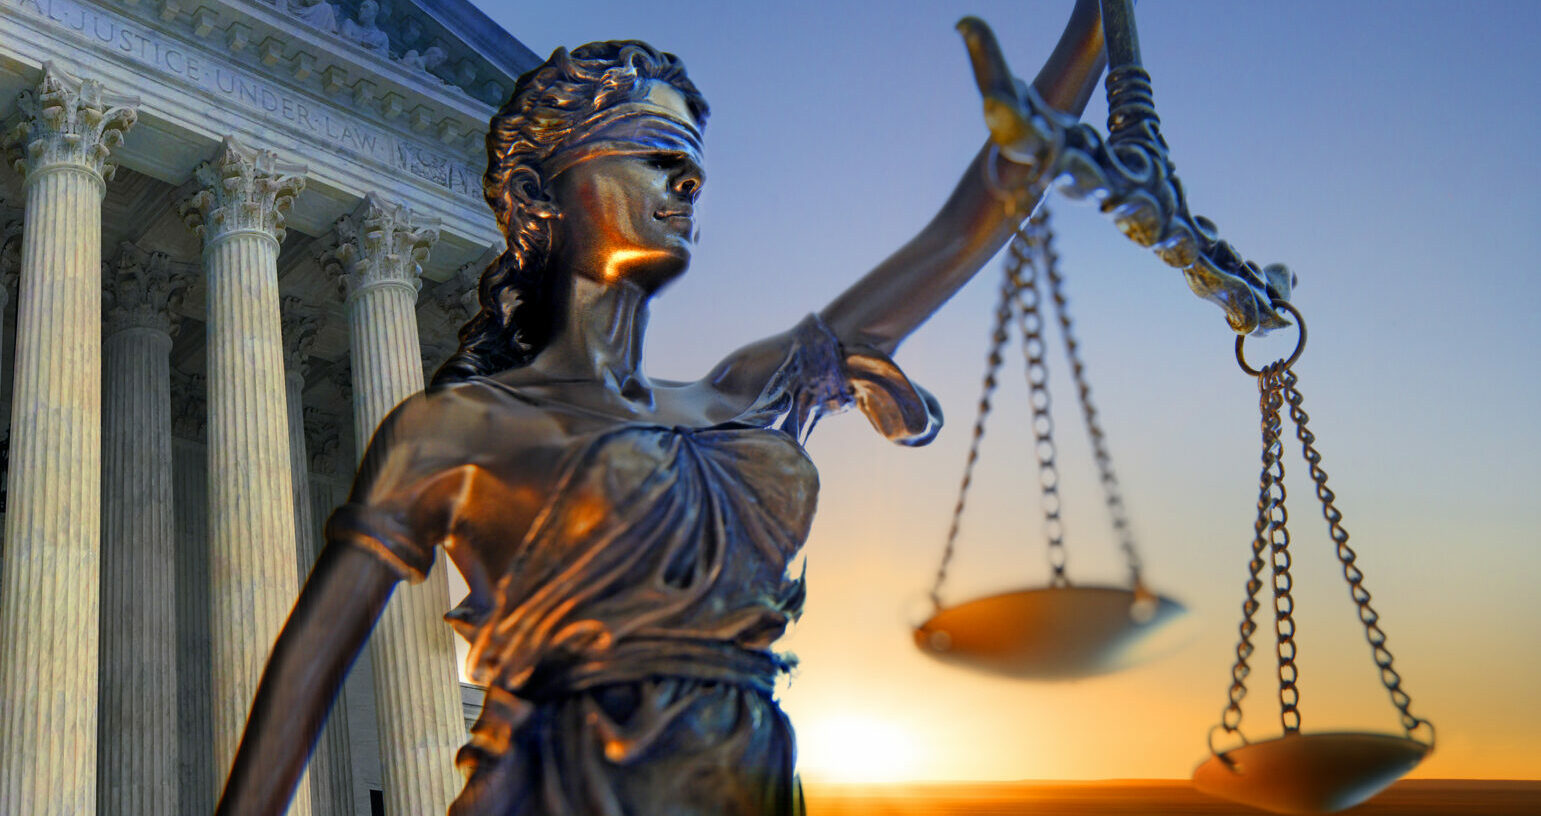 A statue of the blindfolded lady justice in front of the United States Supreme Court building as the sun rises in the distance symbolizing the dawning of a new era.